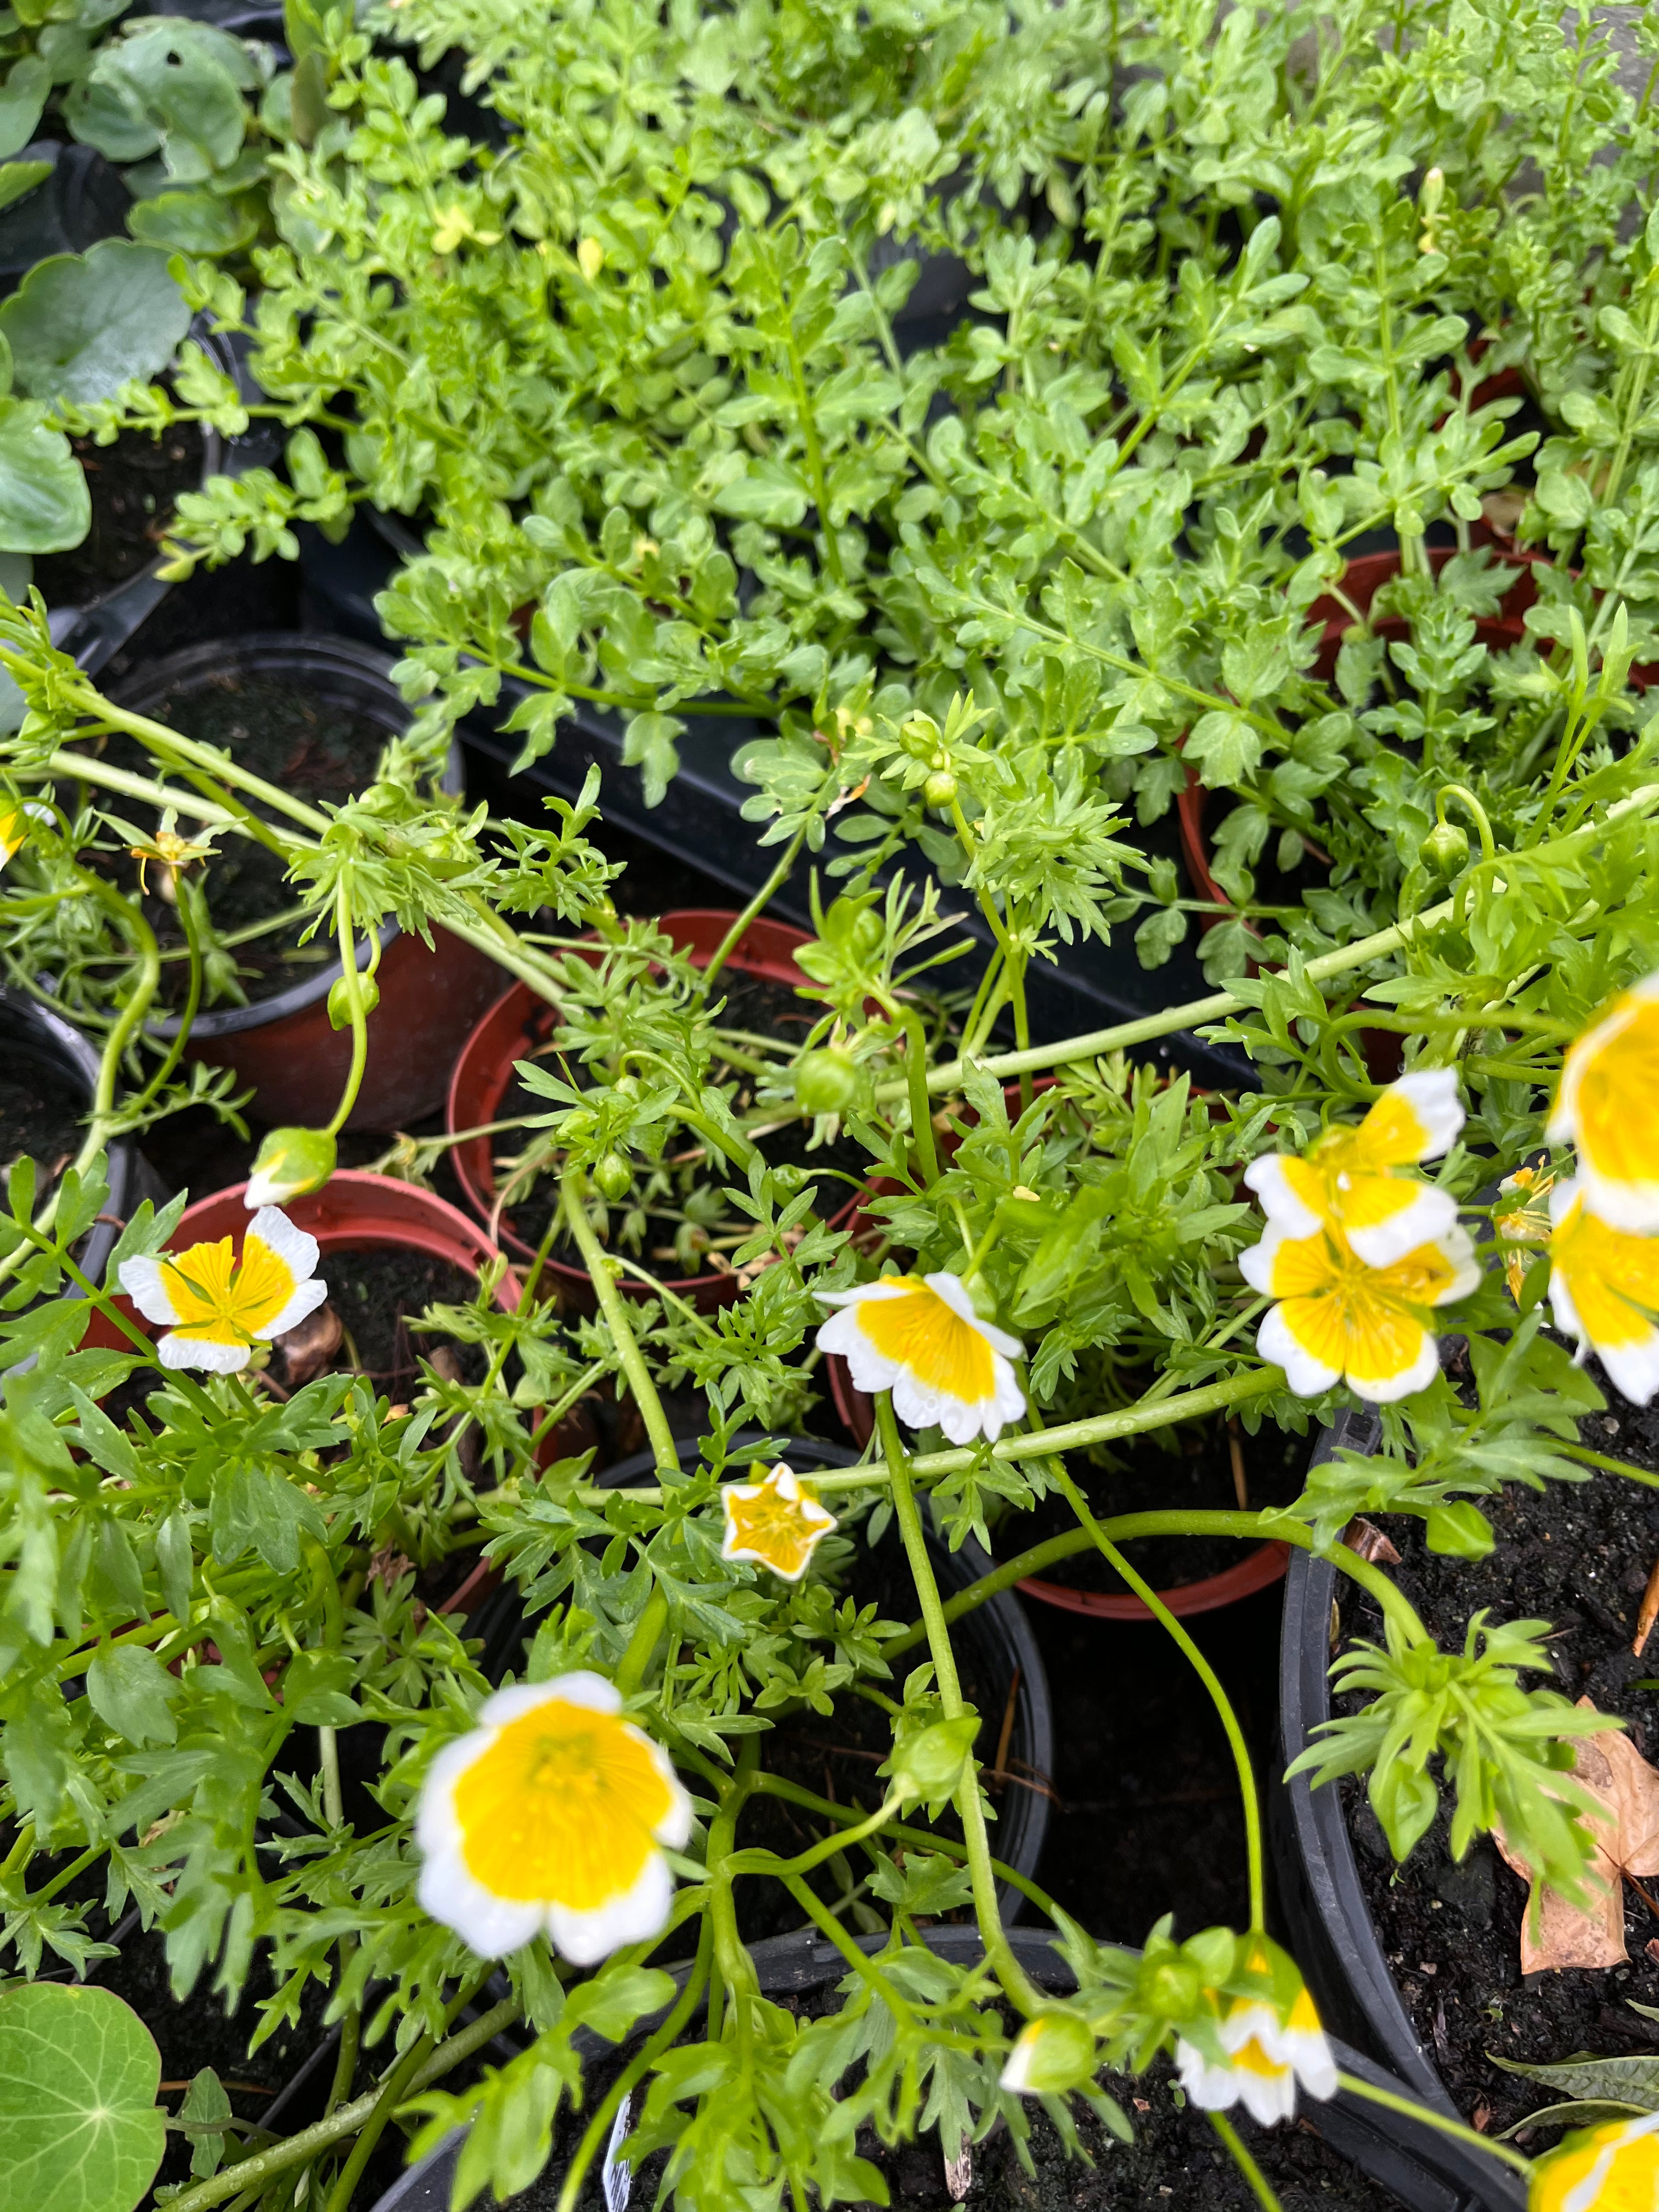 Poached Egg Plants in pots